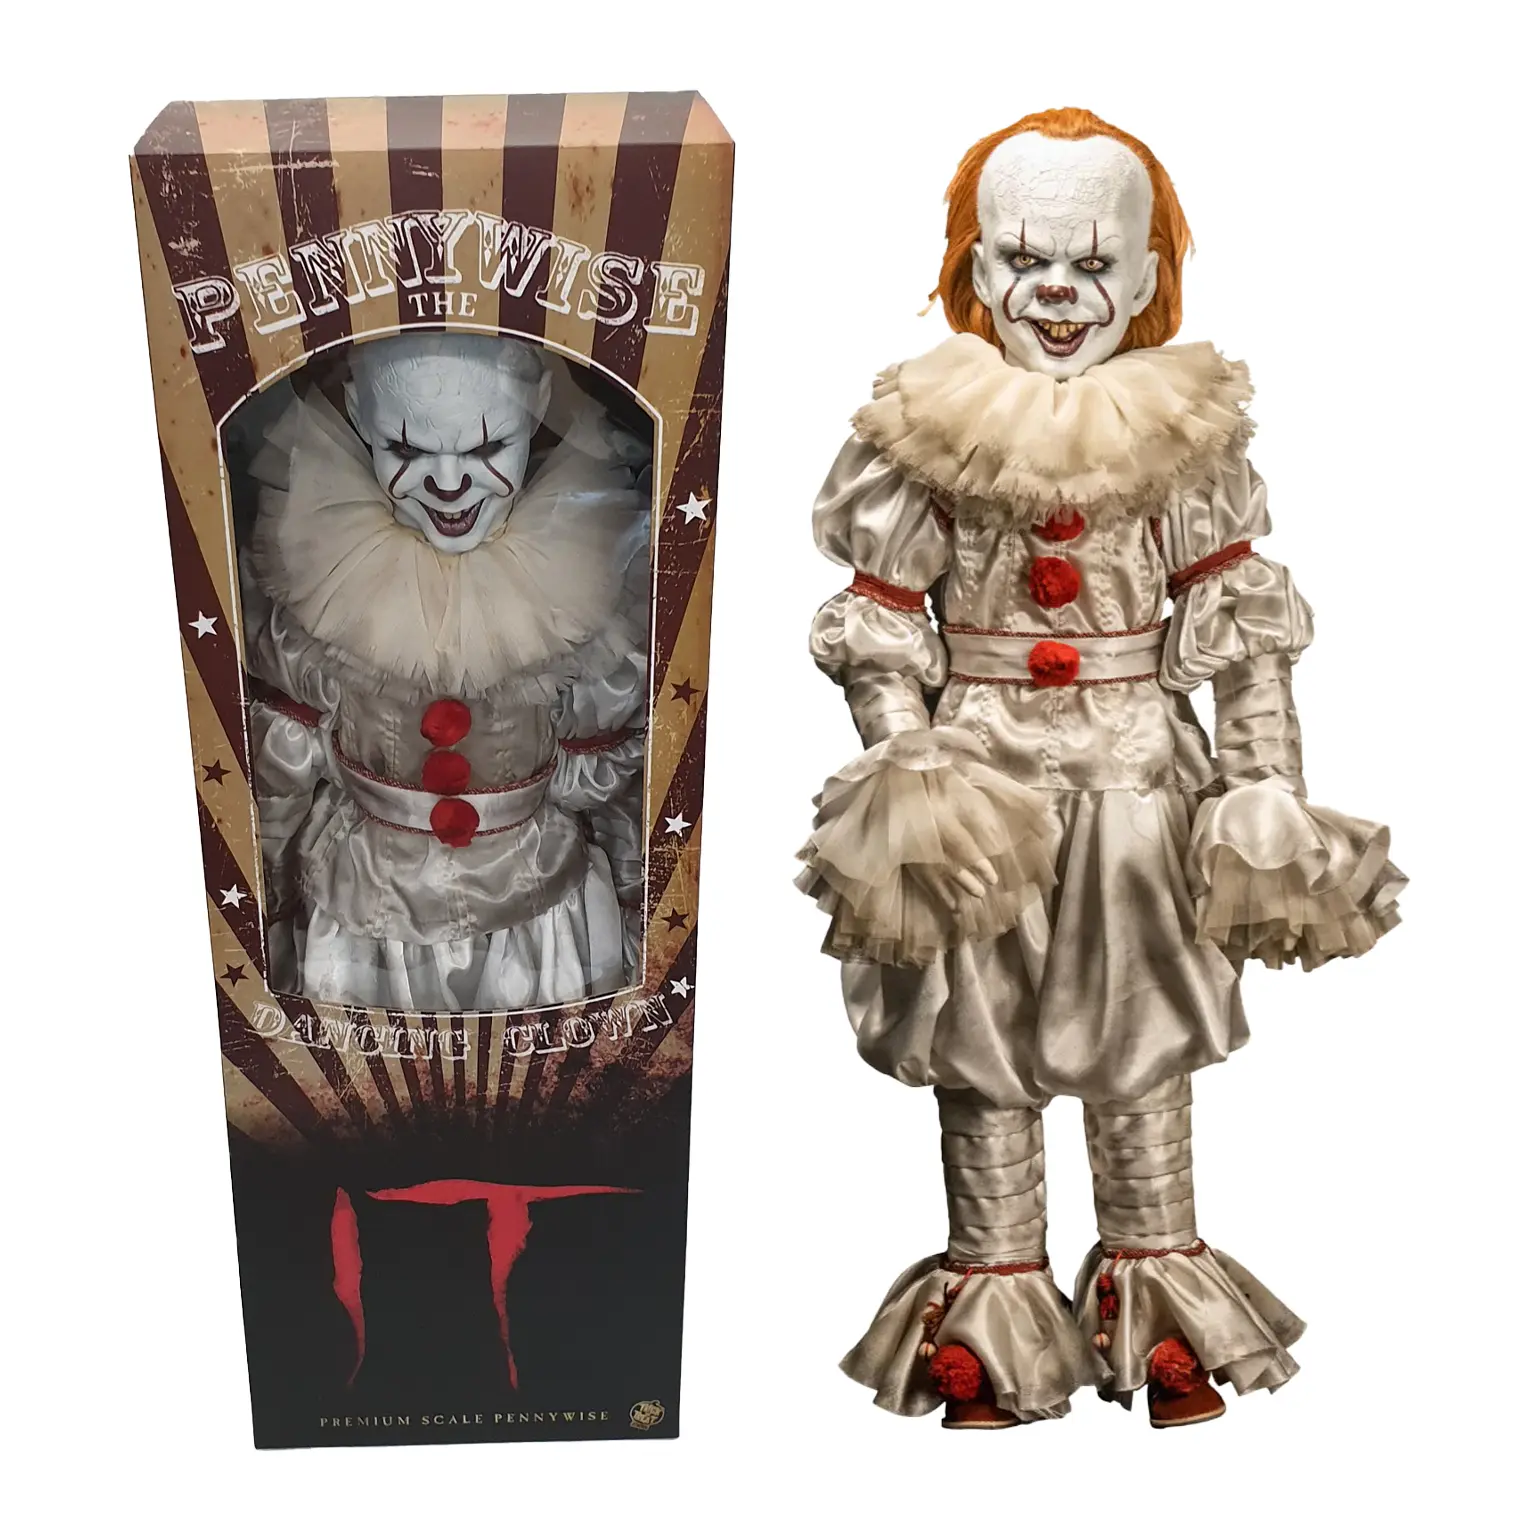 IT Pennywise Premium Scale 50″ Tall Doll Figurines Extra Large (Over 50cm)